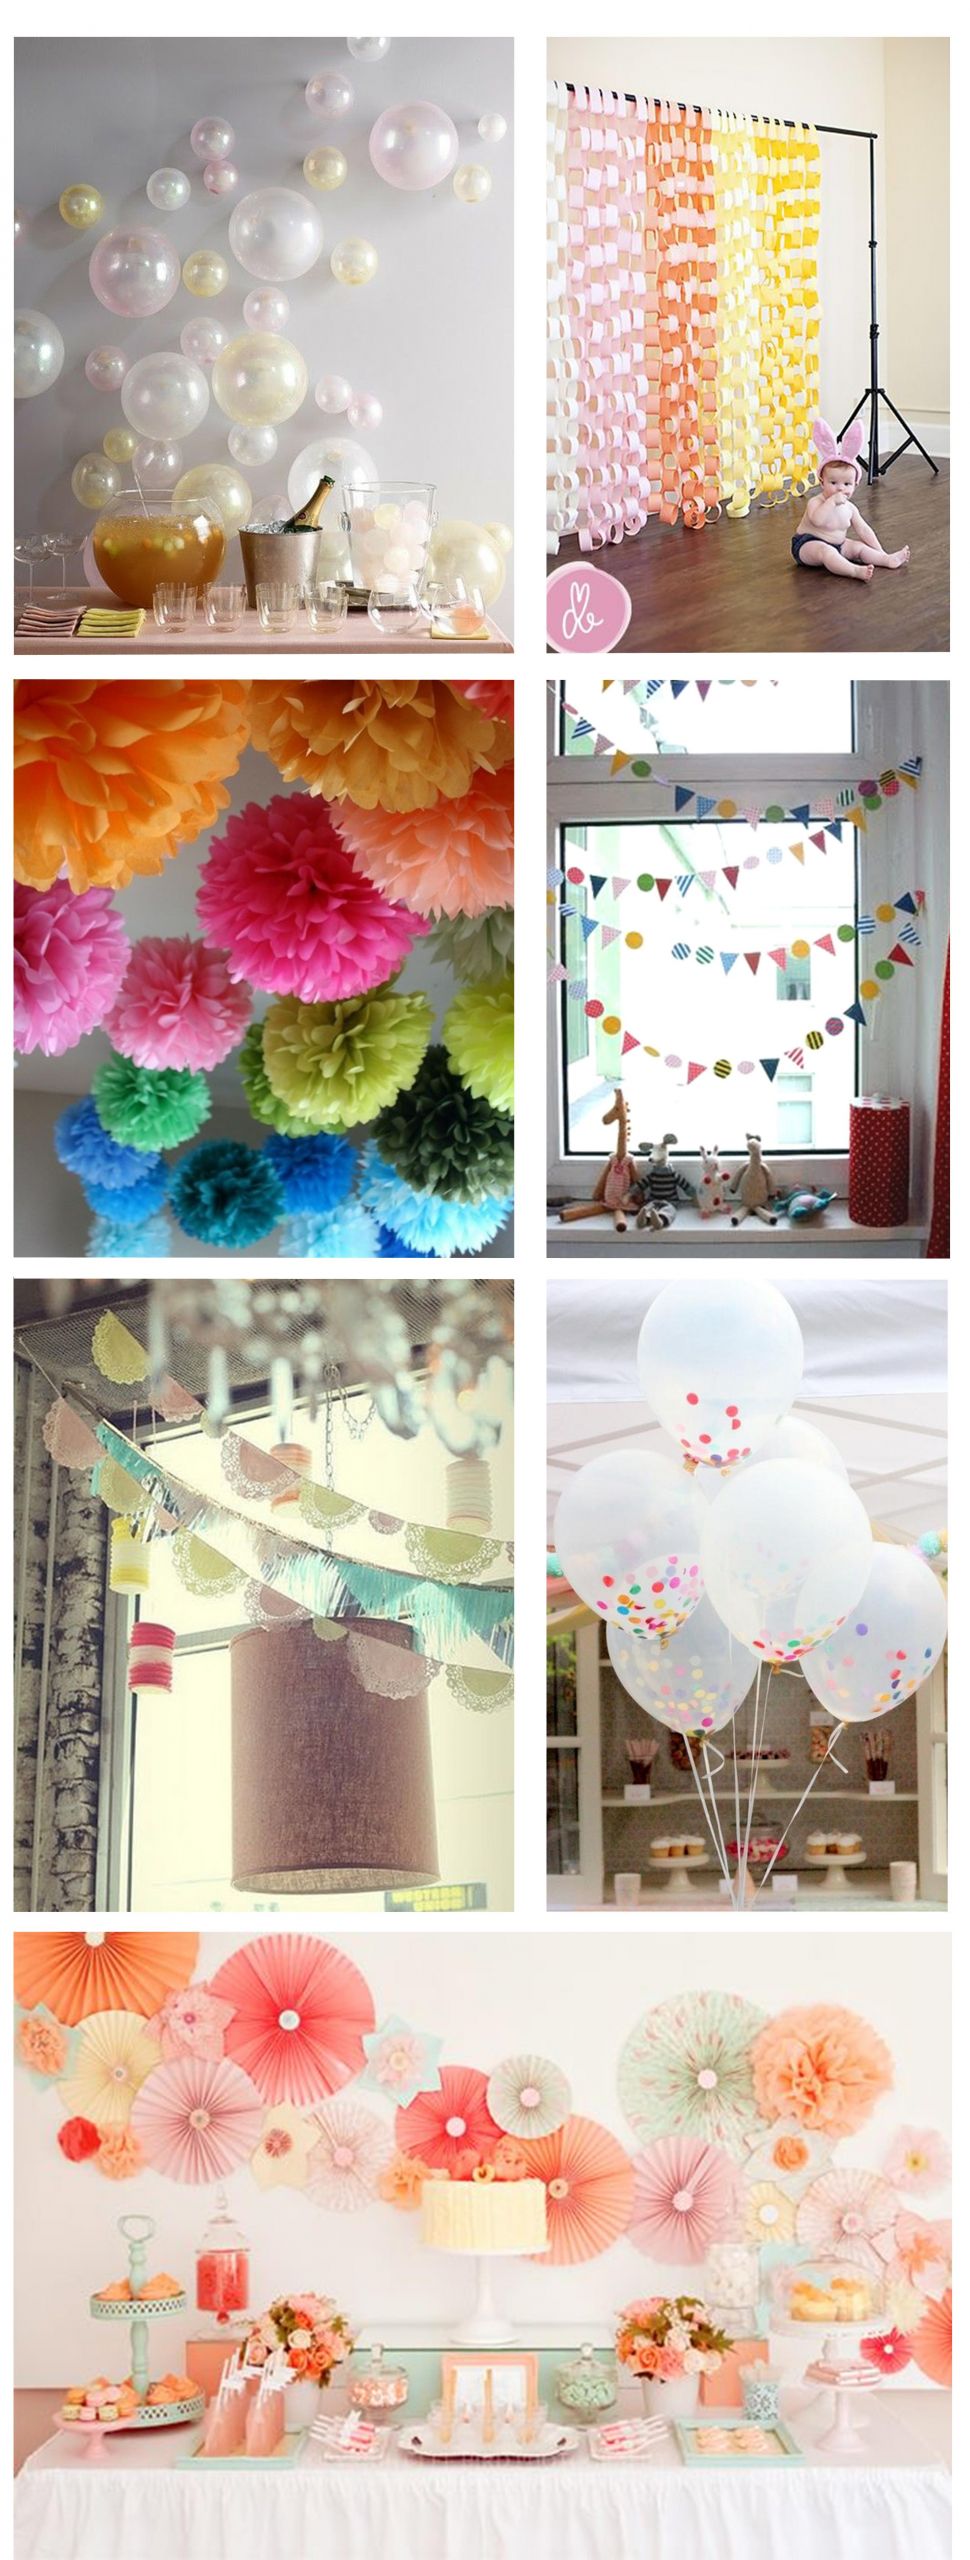 How To Decorate Birthday Party At Home
 Ideas for home made party decorations